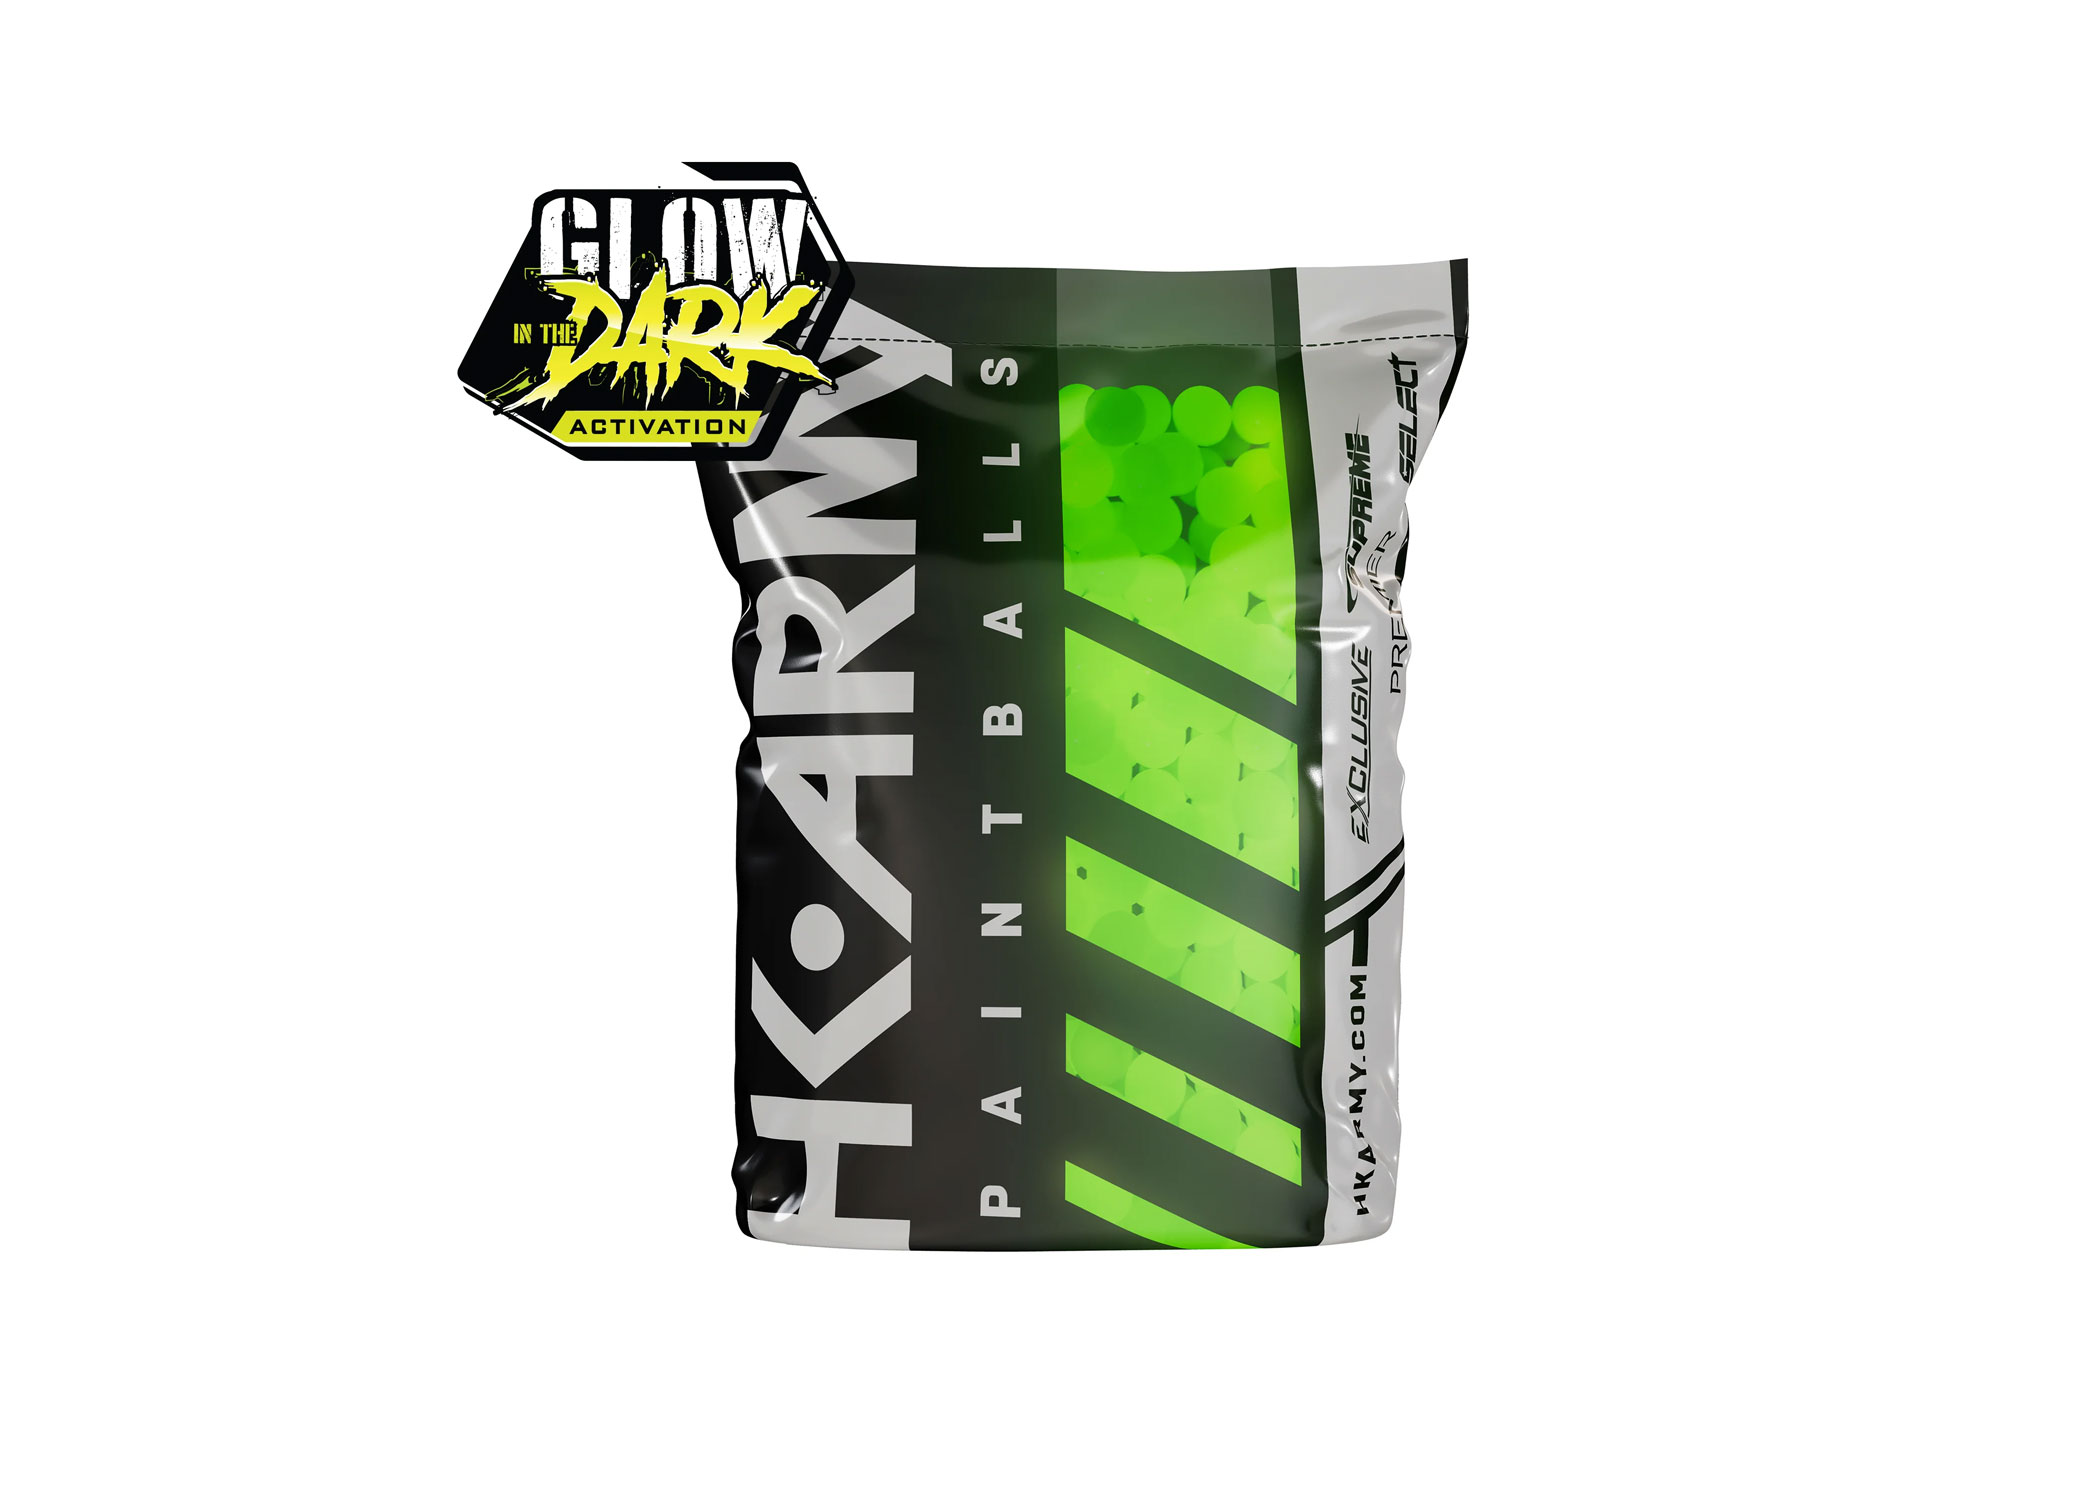 HK Army Glow-In-The-Dark Paintballs - 200 Rounds